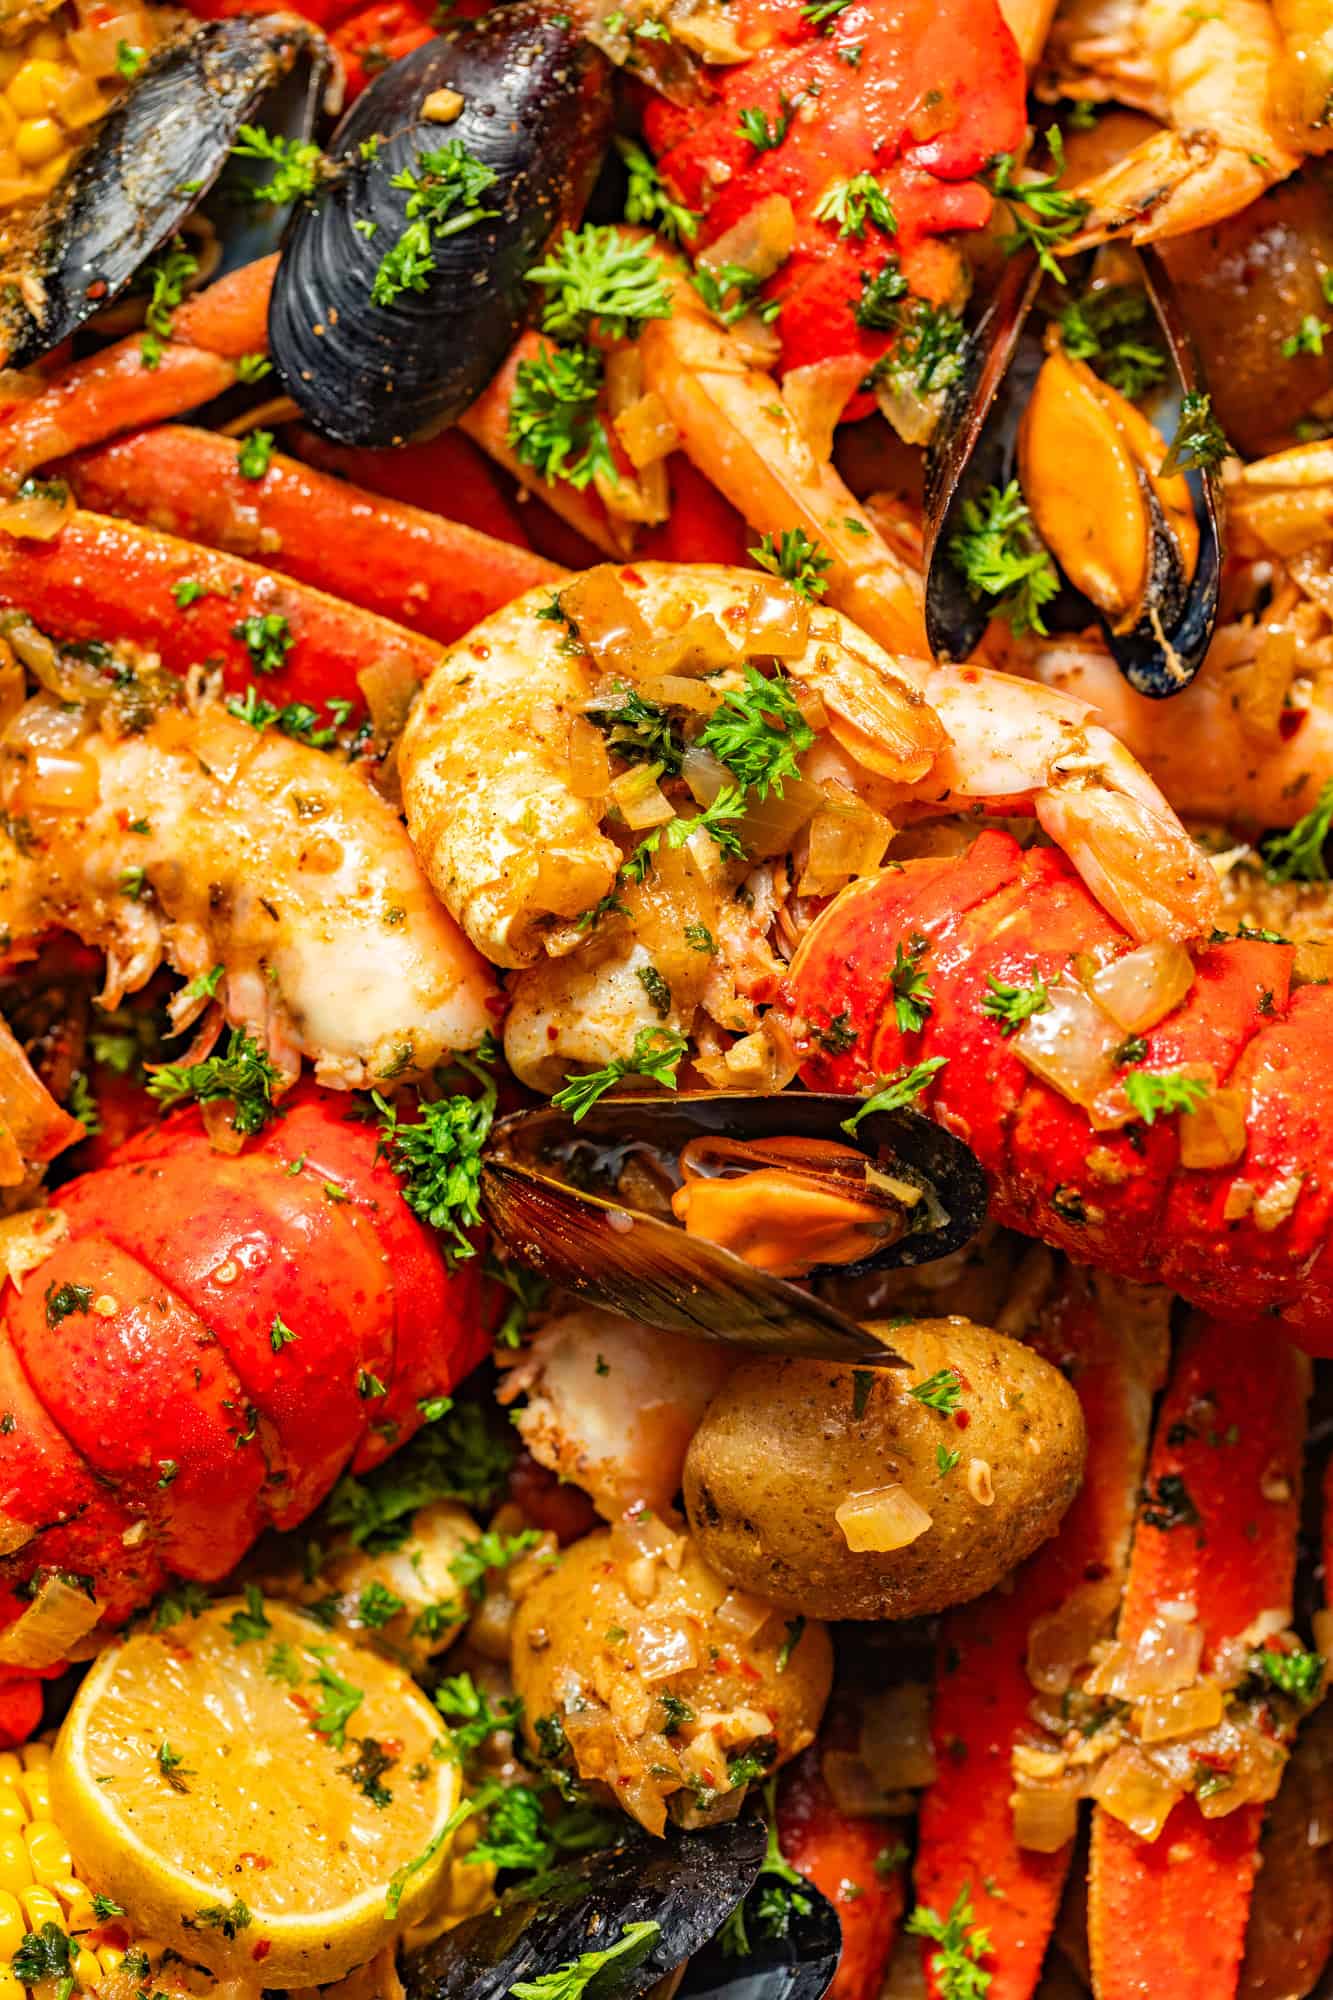 up close photo of shrimp, lobsters, mussels, clams, and lemons garnished with parsley and seafood boil sauce